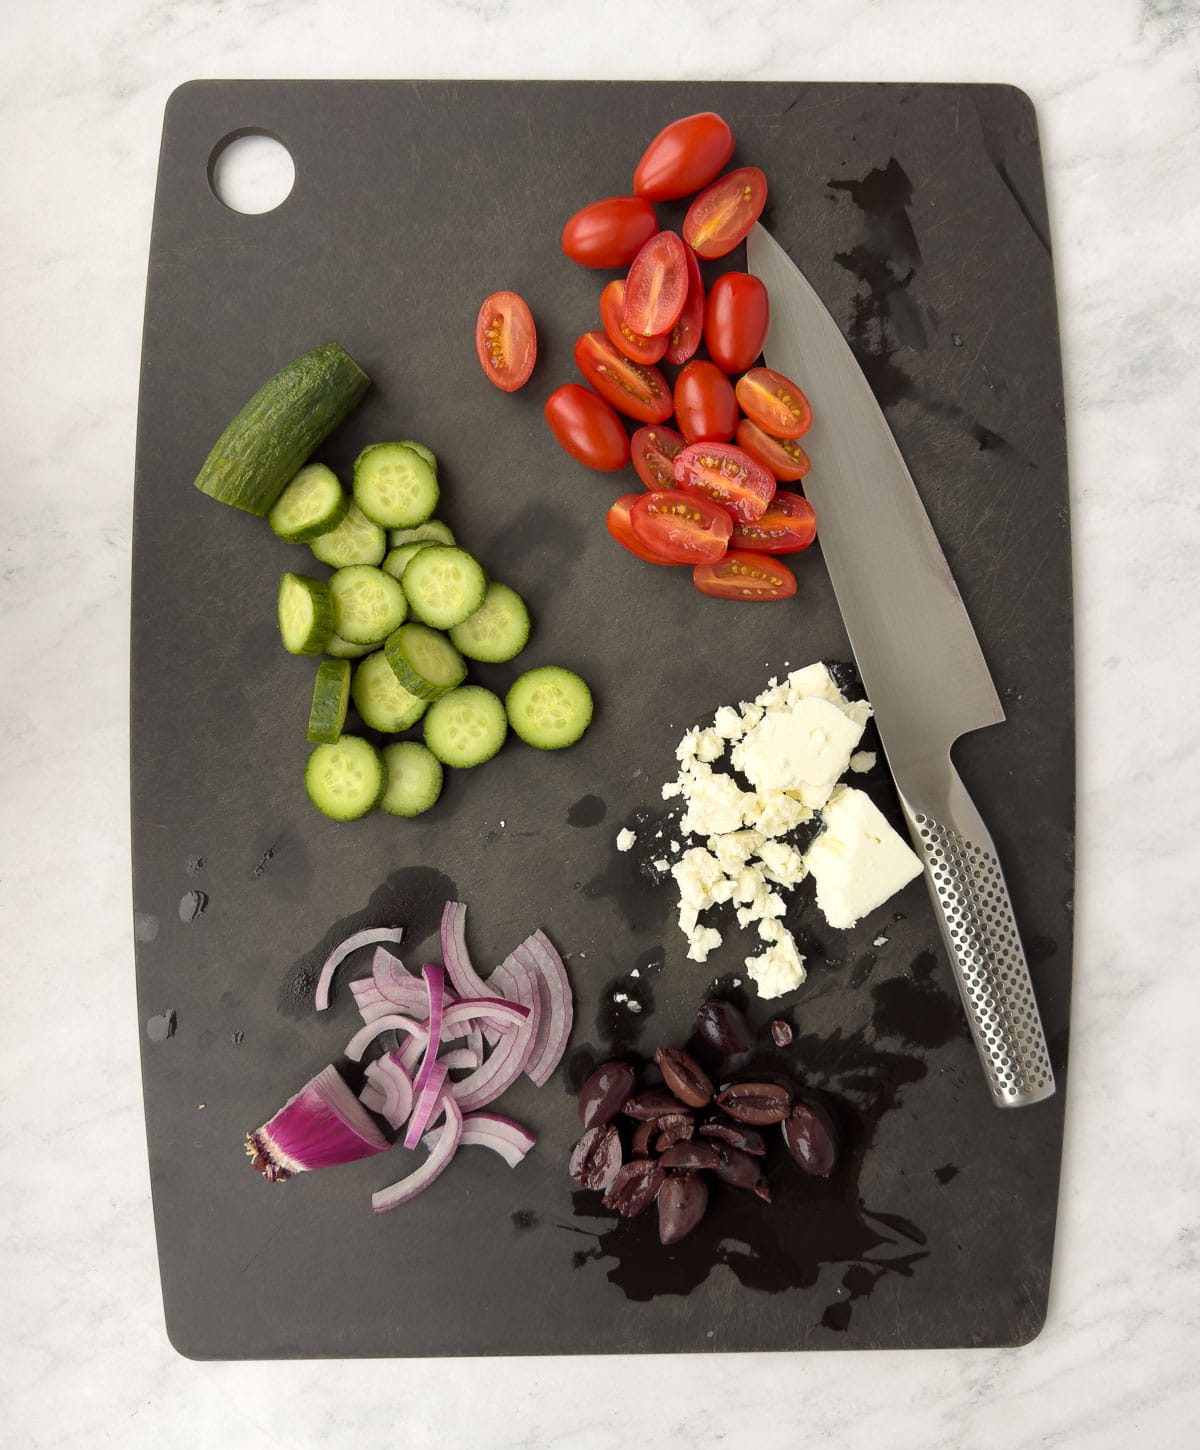 Prepping veggies for pasta salad: tomatoes, olive, cucumbers, feta cheese on a black cutting board.